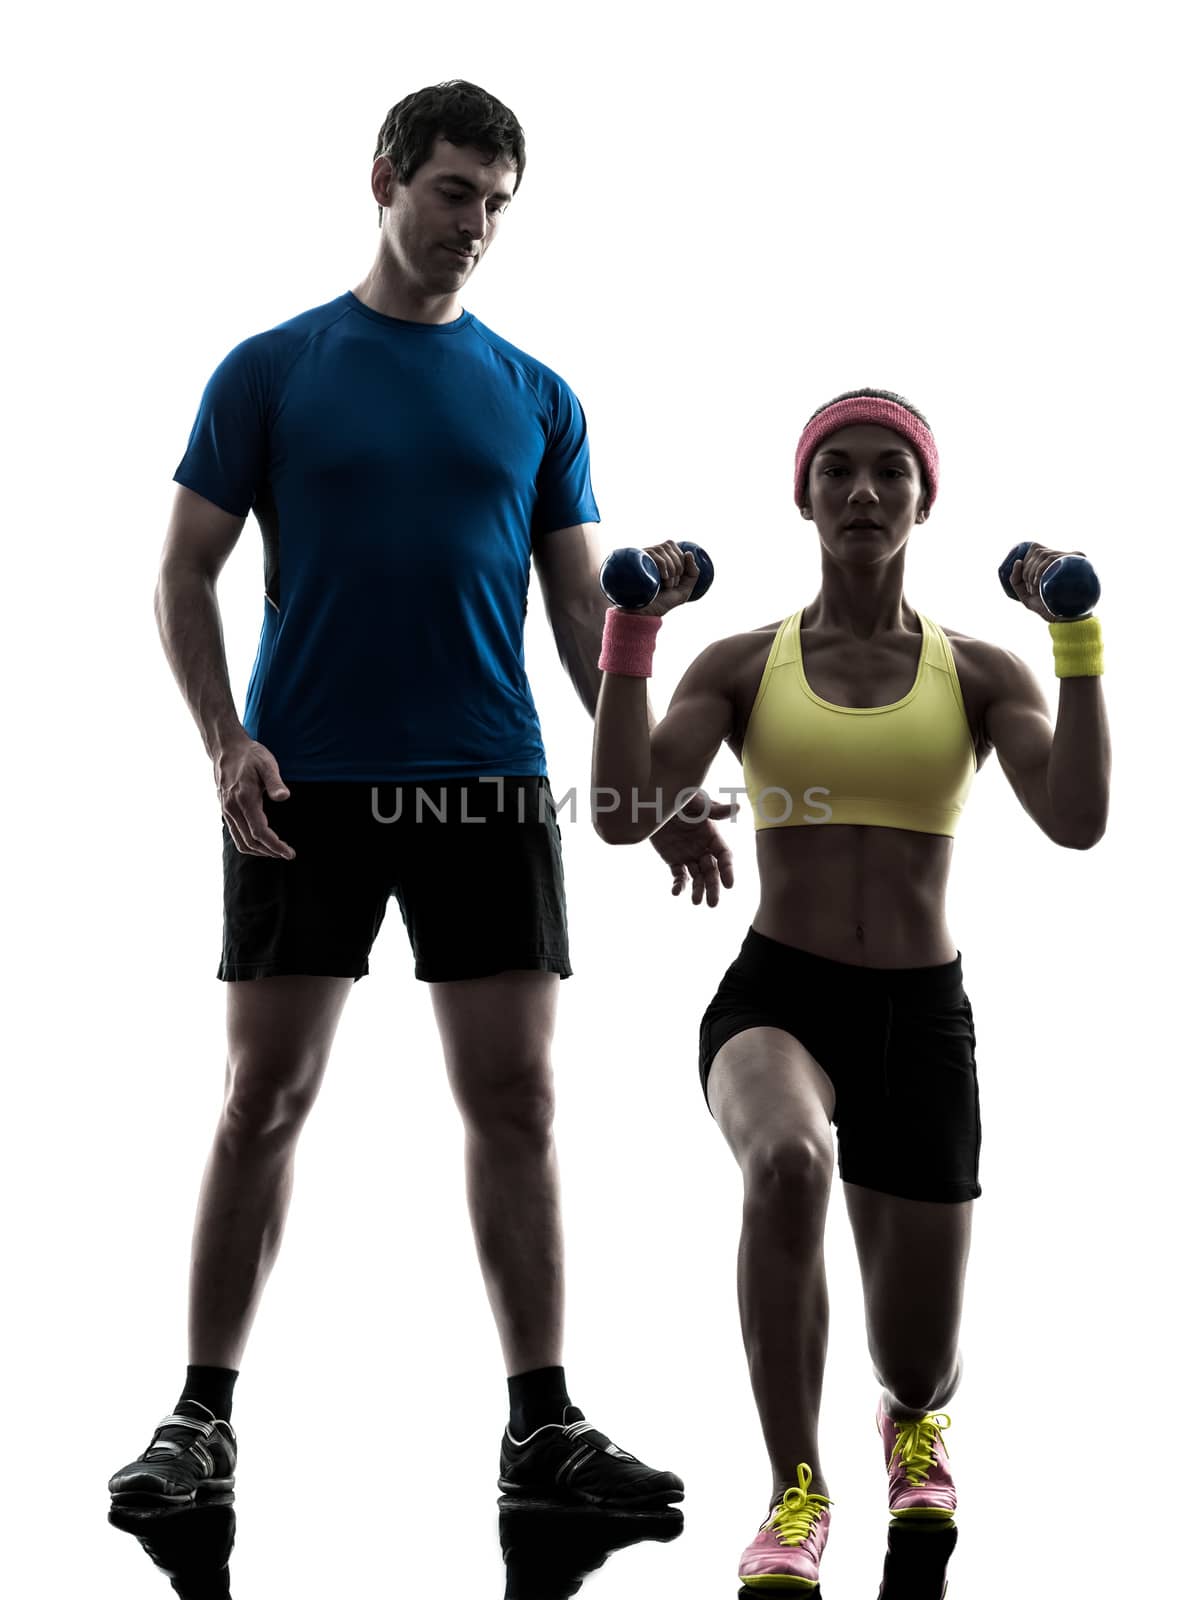 one woman exercising fitness weight training with man coach in silhouette on white background